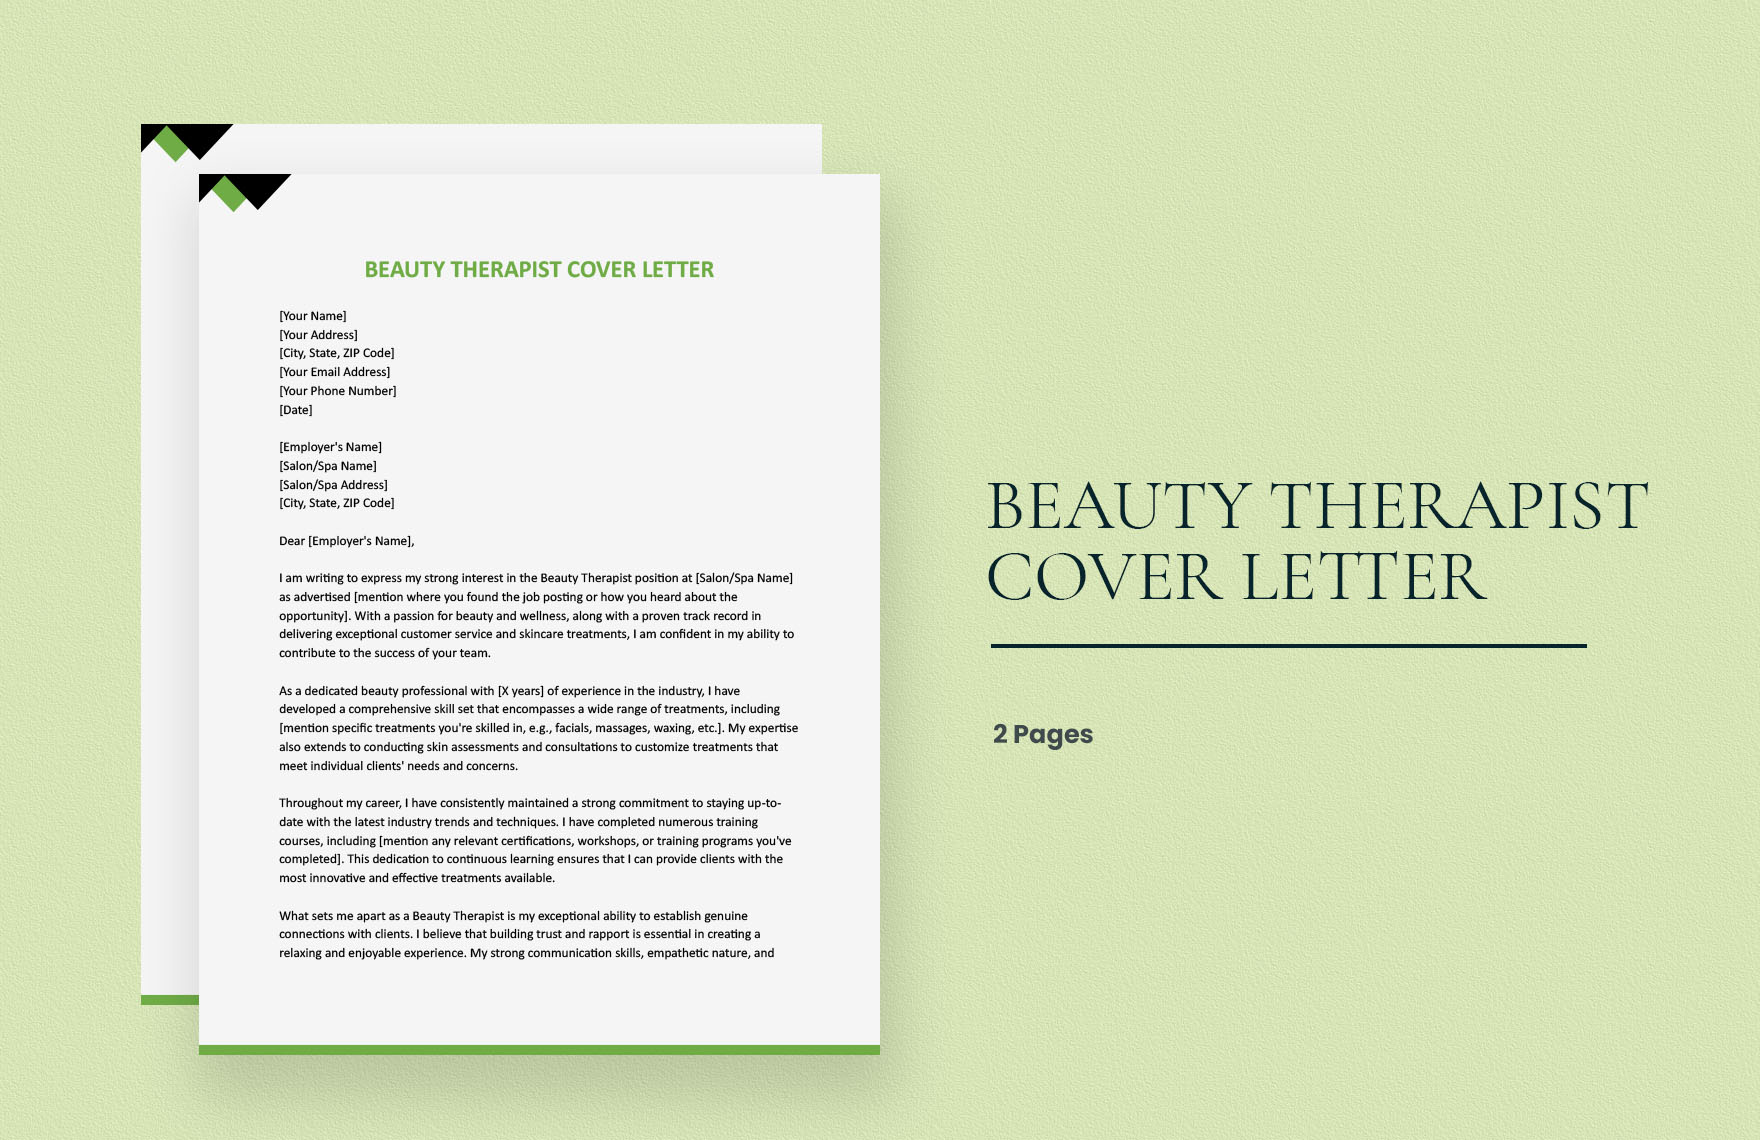 Beauty Therapist Cover Letter in Word, Google Docs